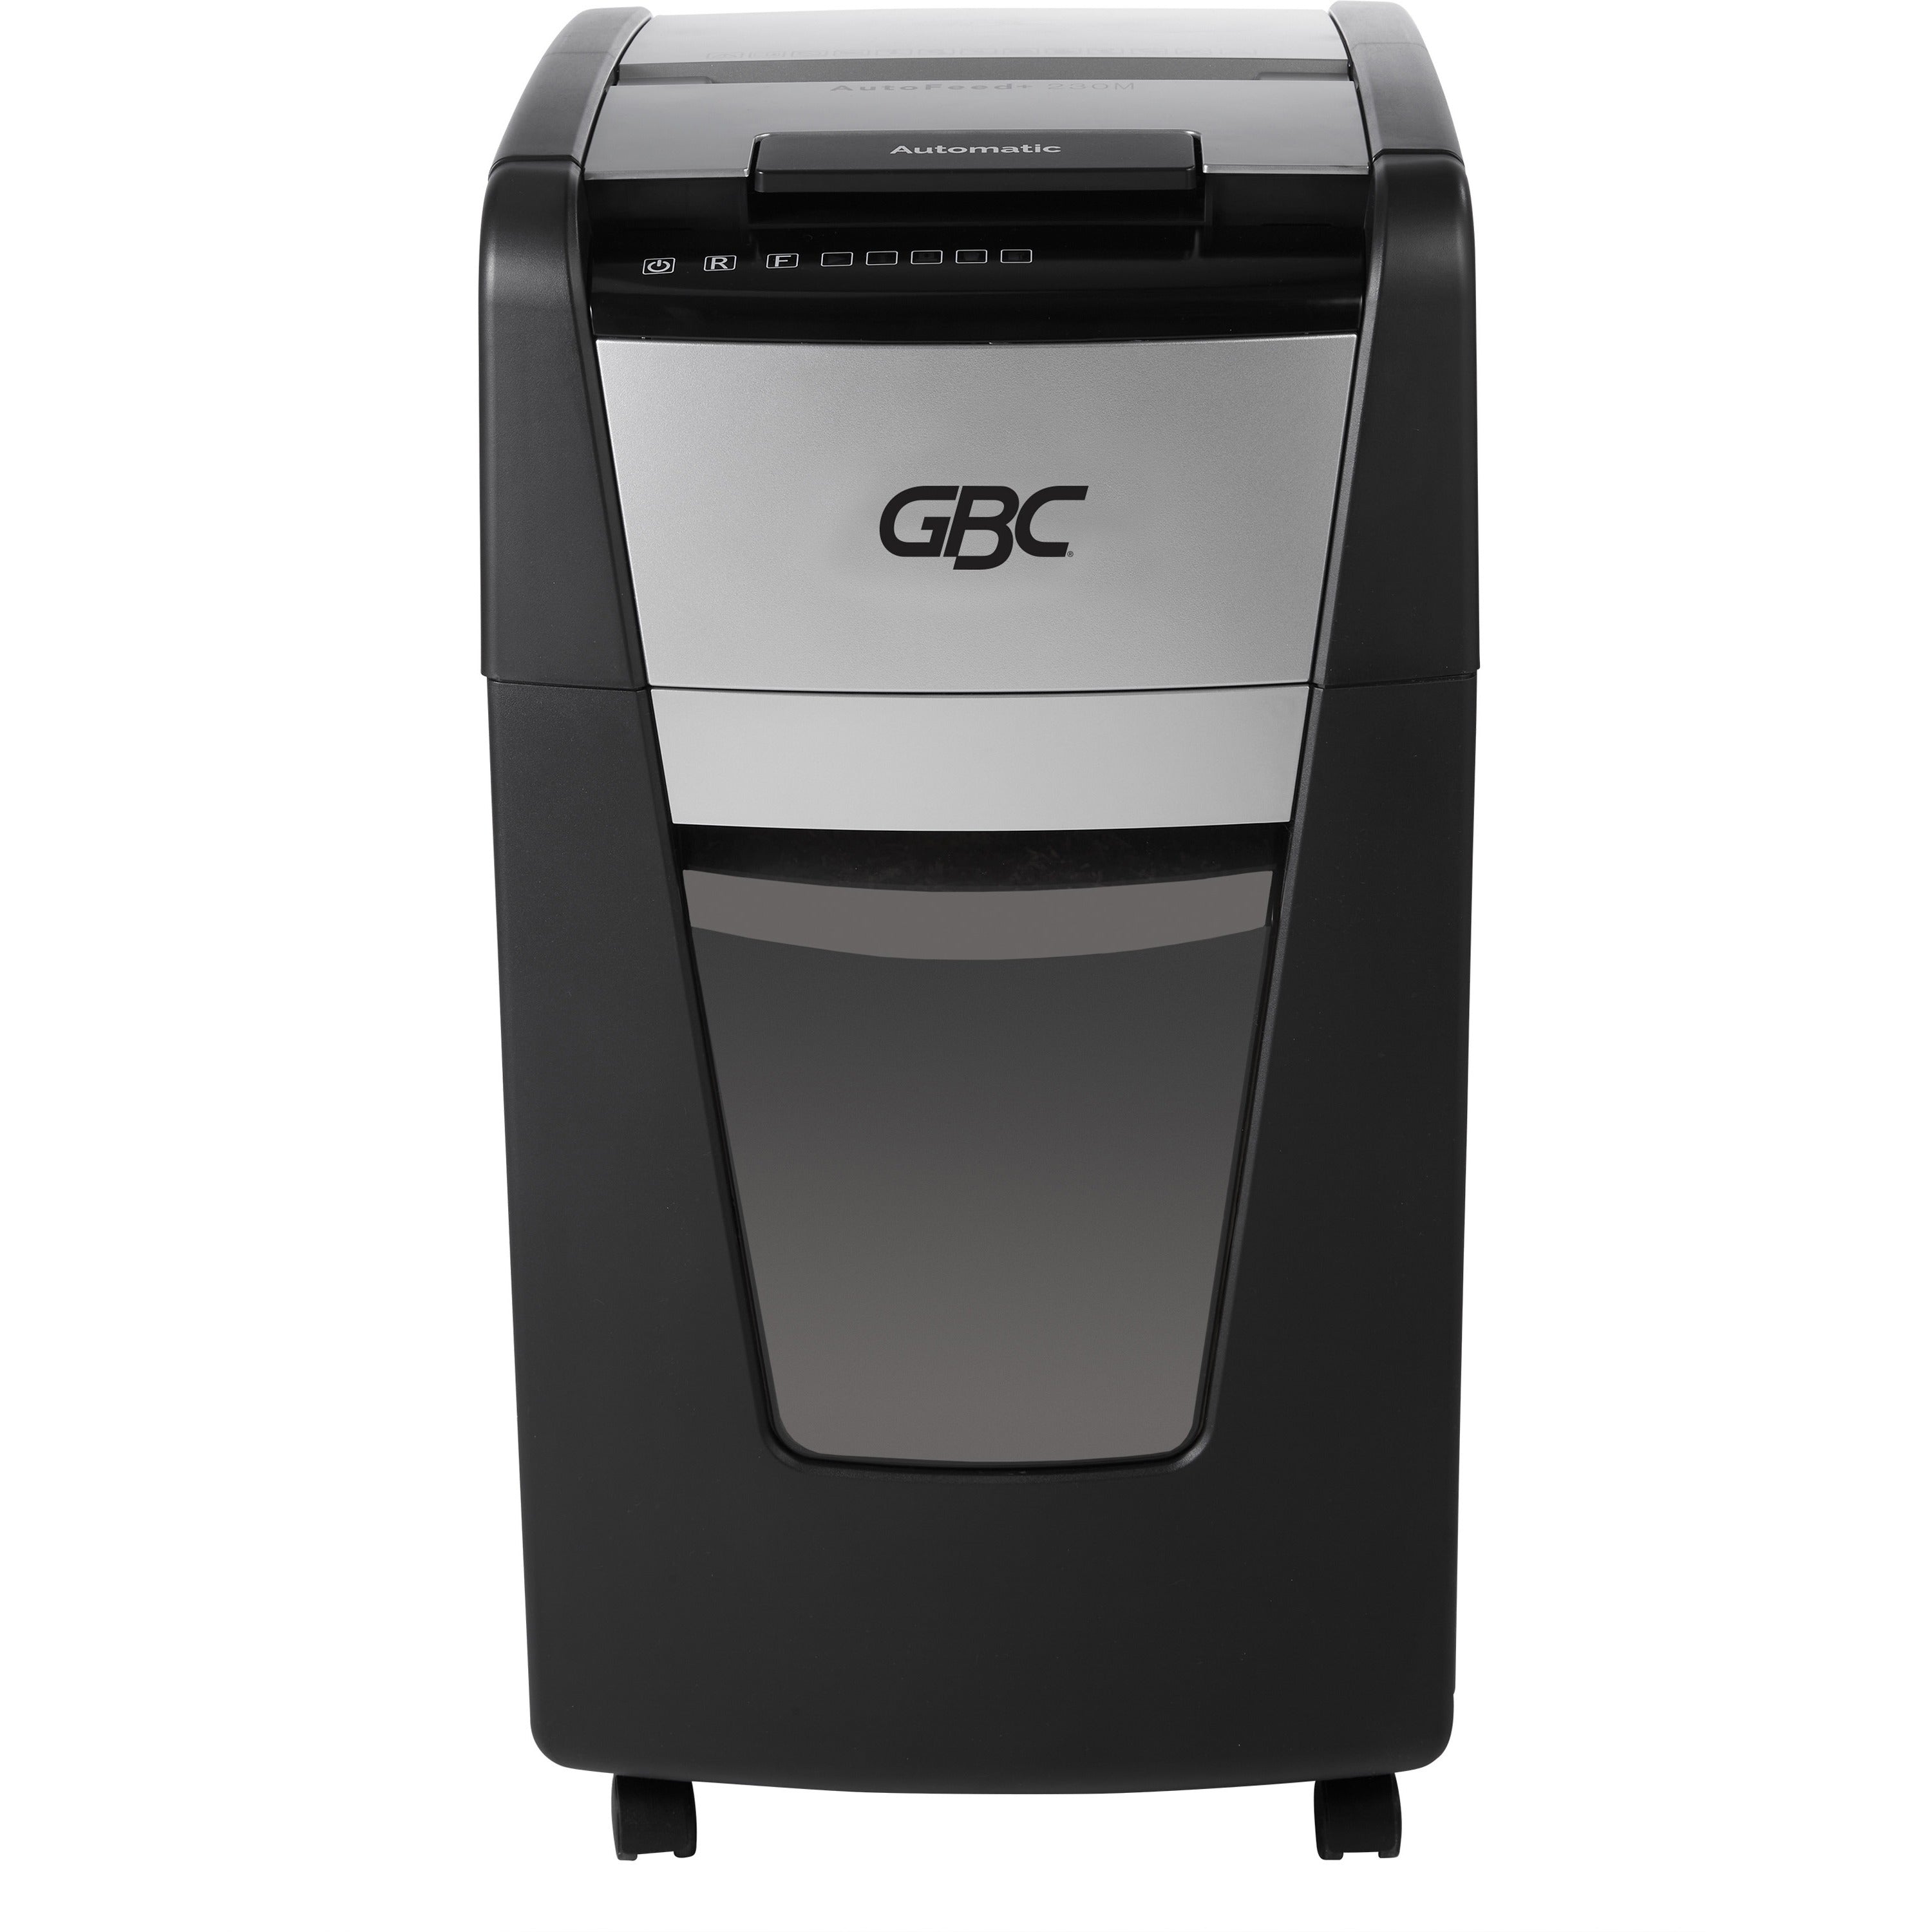 gbc-autofeed+-small-office-shredder-230m-micro-cut-230-sheets-continuous-shredder-micro-cut-8-per-pass-for-shredding-credit-card-paper-clip-staples-paper-p-5-30-minute-run-time-16-gal-wastebin-capacity-black_gbcwsm1757607 - 2